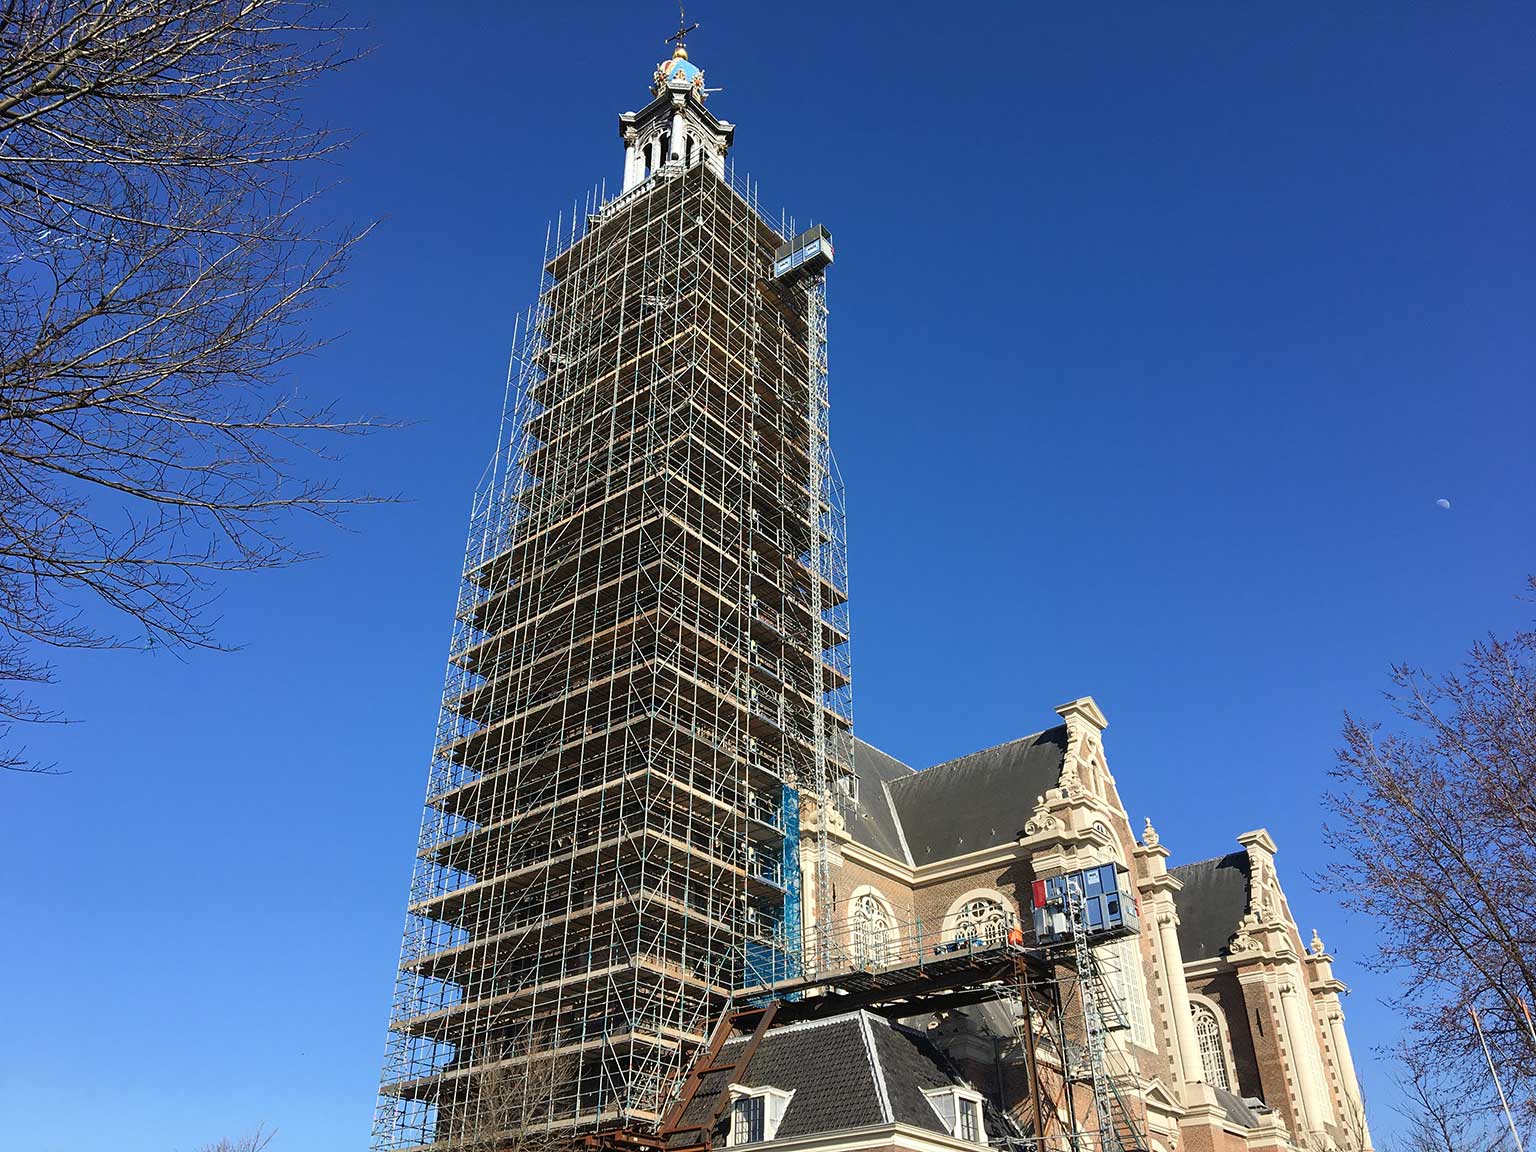 Westertoren, Amsterdam, covered in scaffolding for maintenance